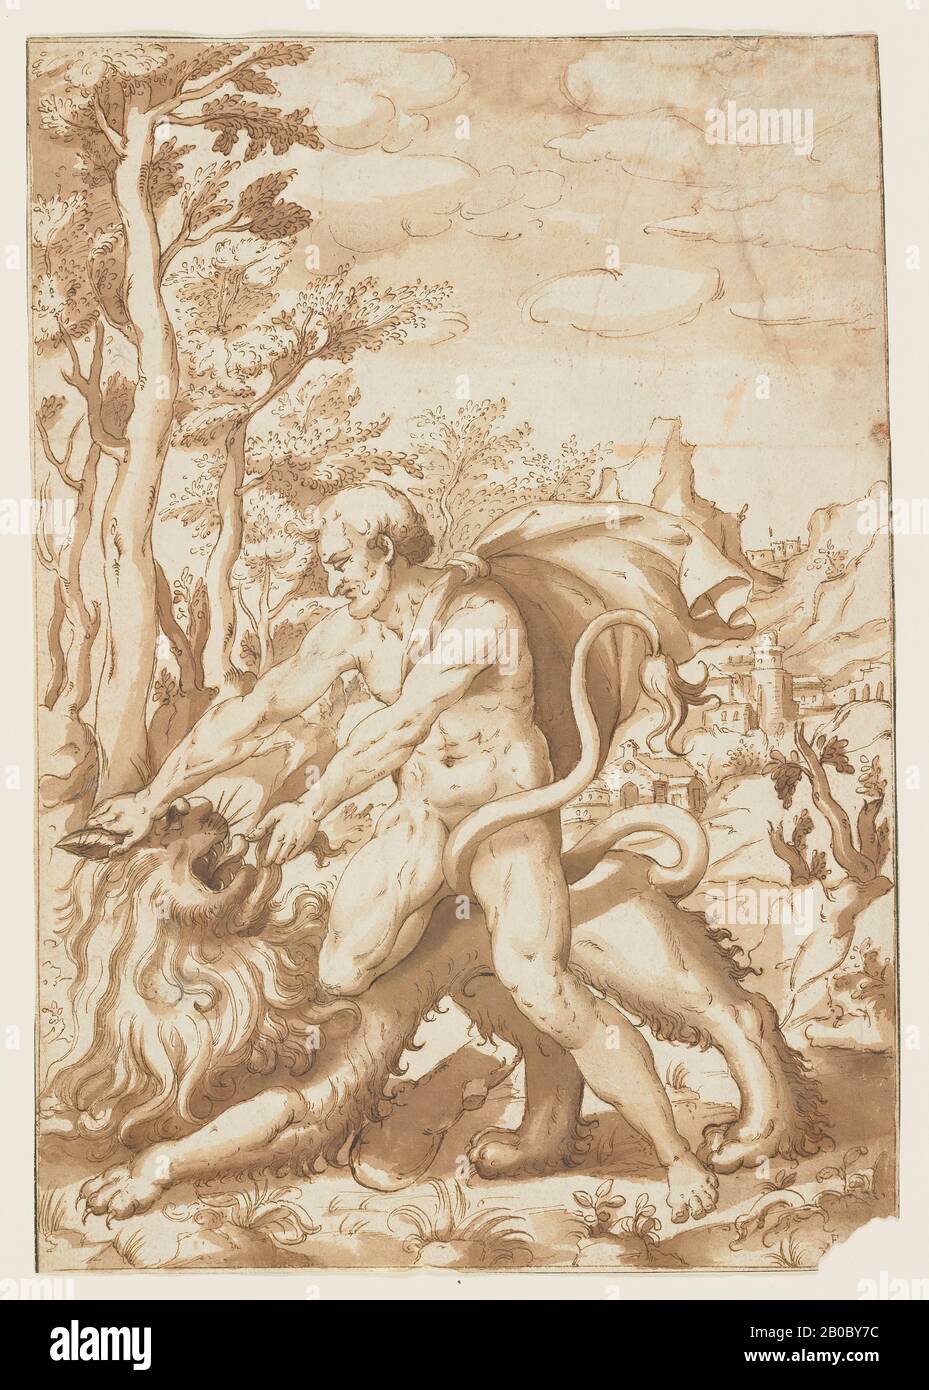 Unknown Artist, Heracles and the Nemean Lion, 1500-1600, ink, wash on paper, 9 3/16 in. x 13 1/4 in. (23.4 cm. x 33.6 cm.) Stock Photo